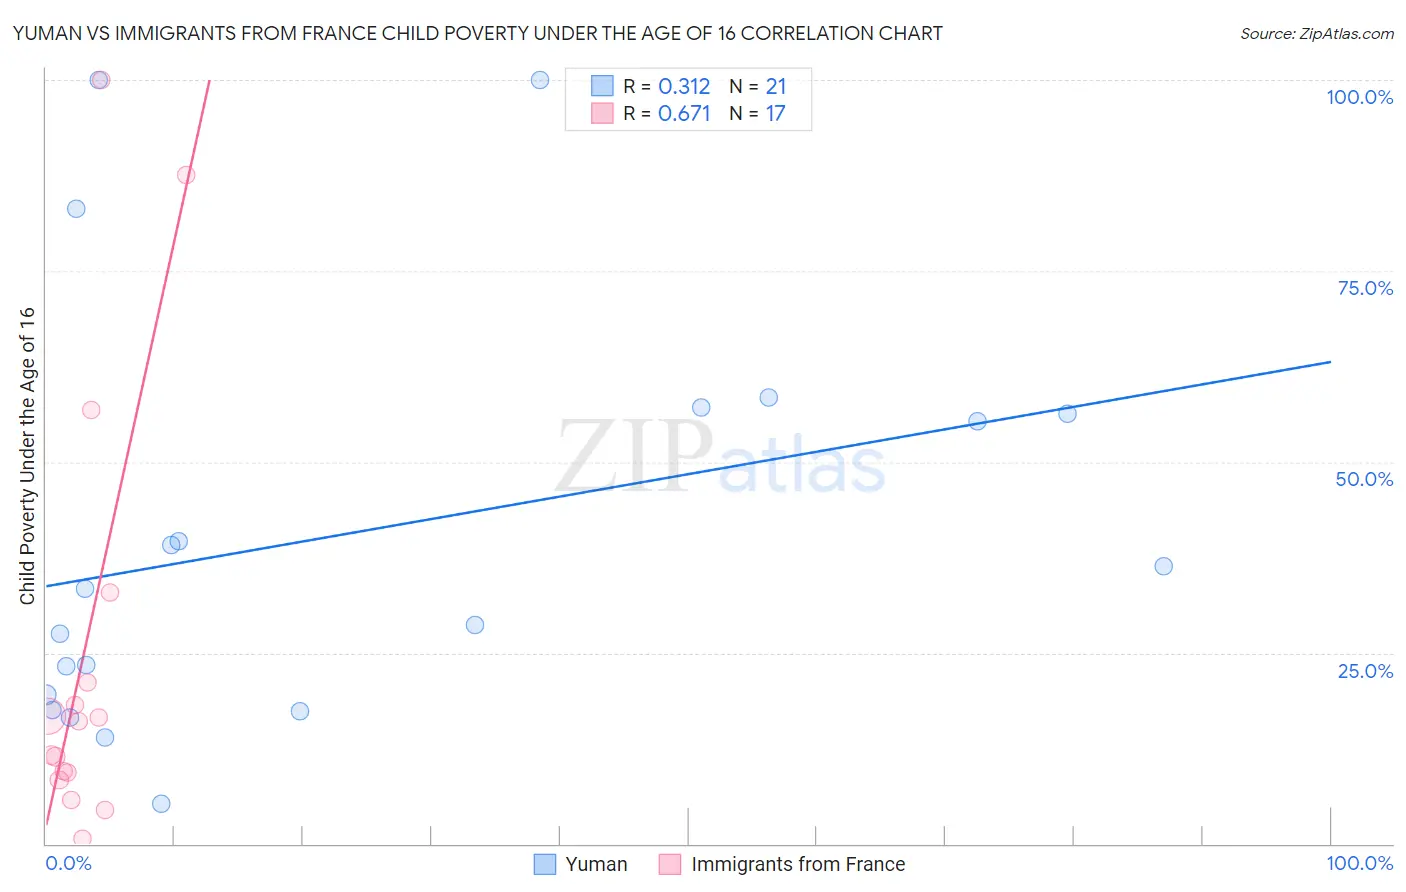 Yuman vs Immigrants from France Child Poverty Under the Age of 16